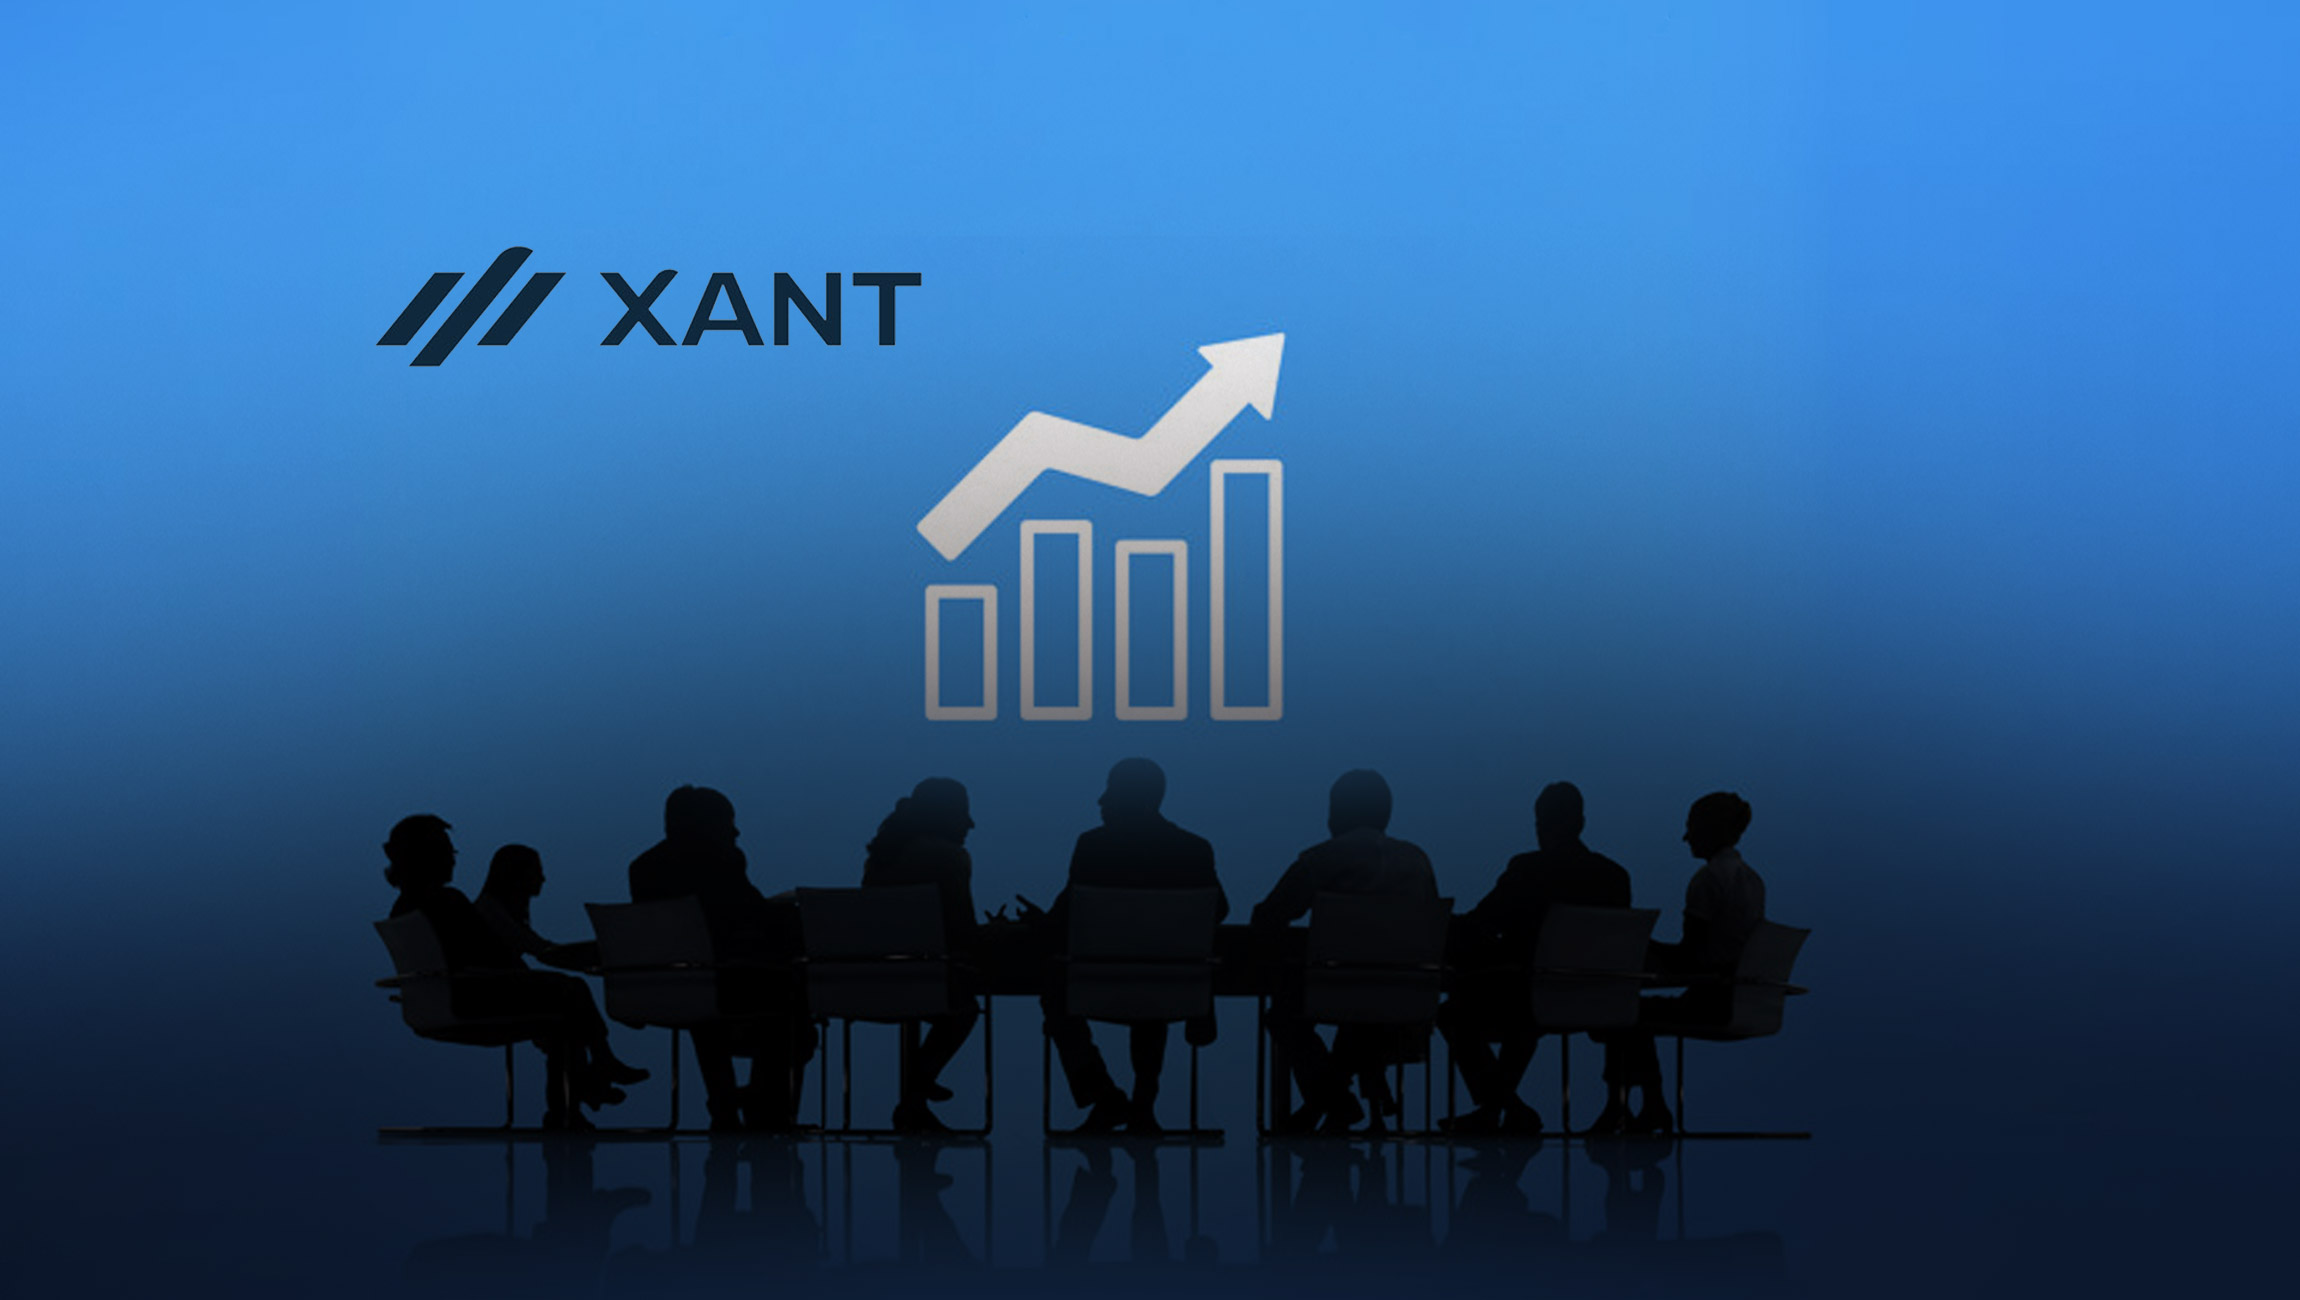 XANT Presents the Digital Transformation of Sales at 22nd Annual Needham Growth Conference